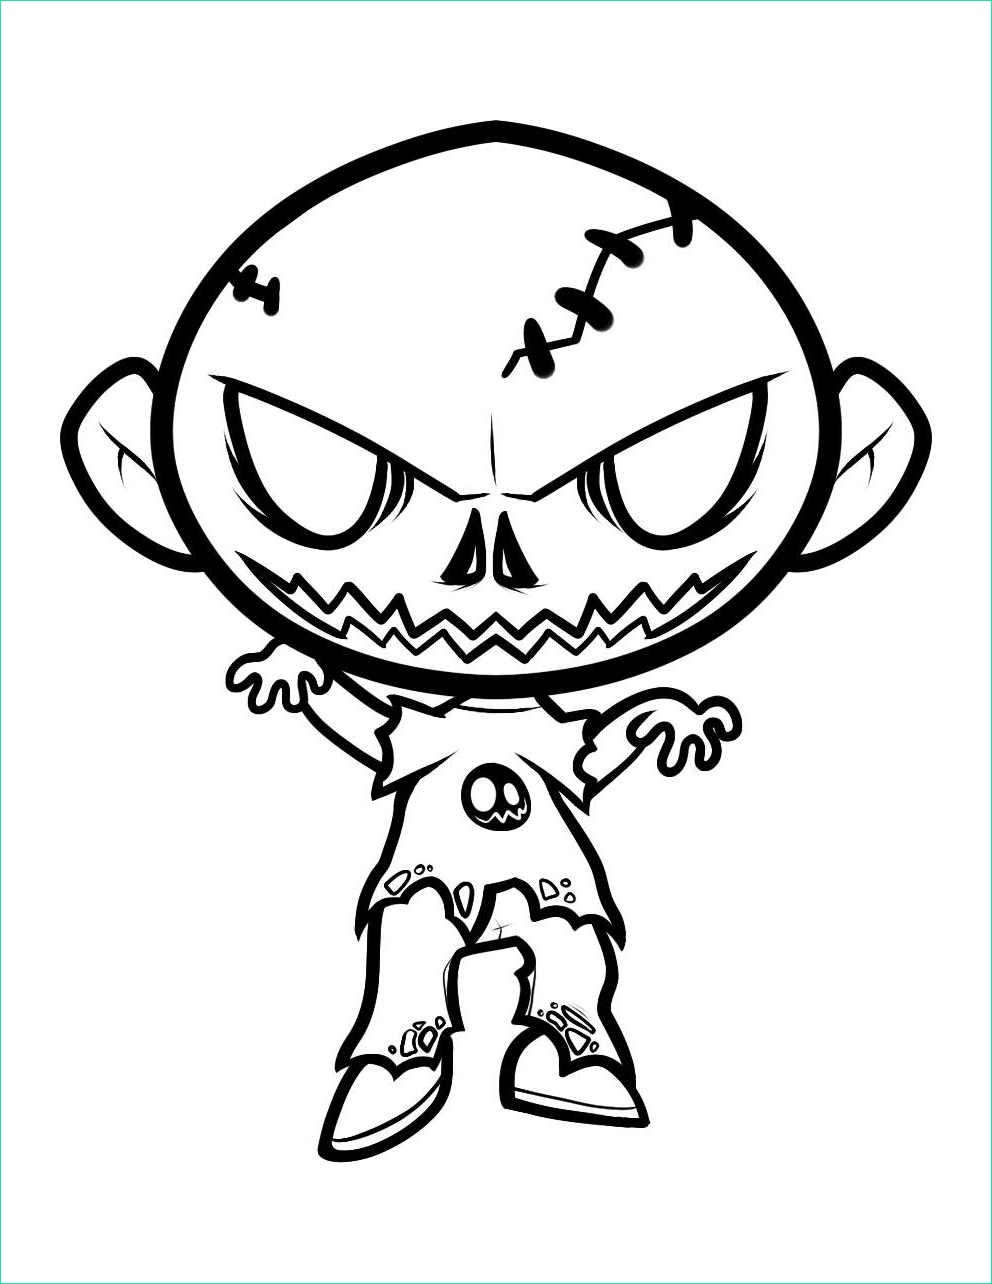 image=zombies Coloring for kids zombies 1